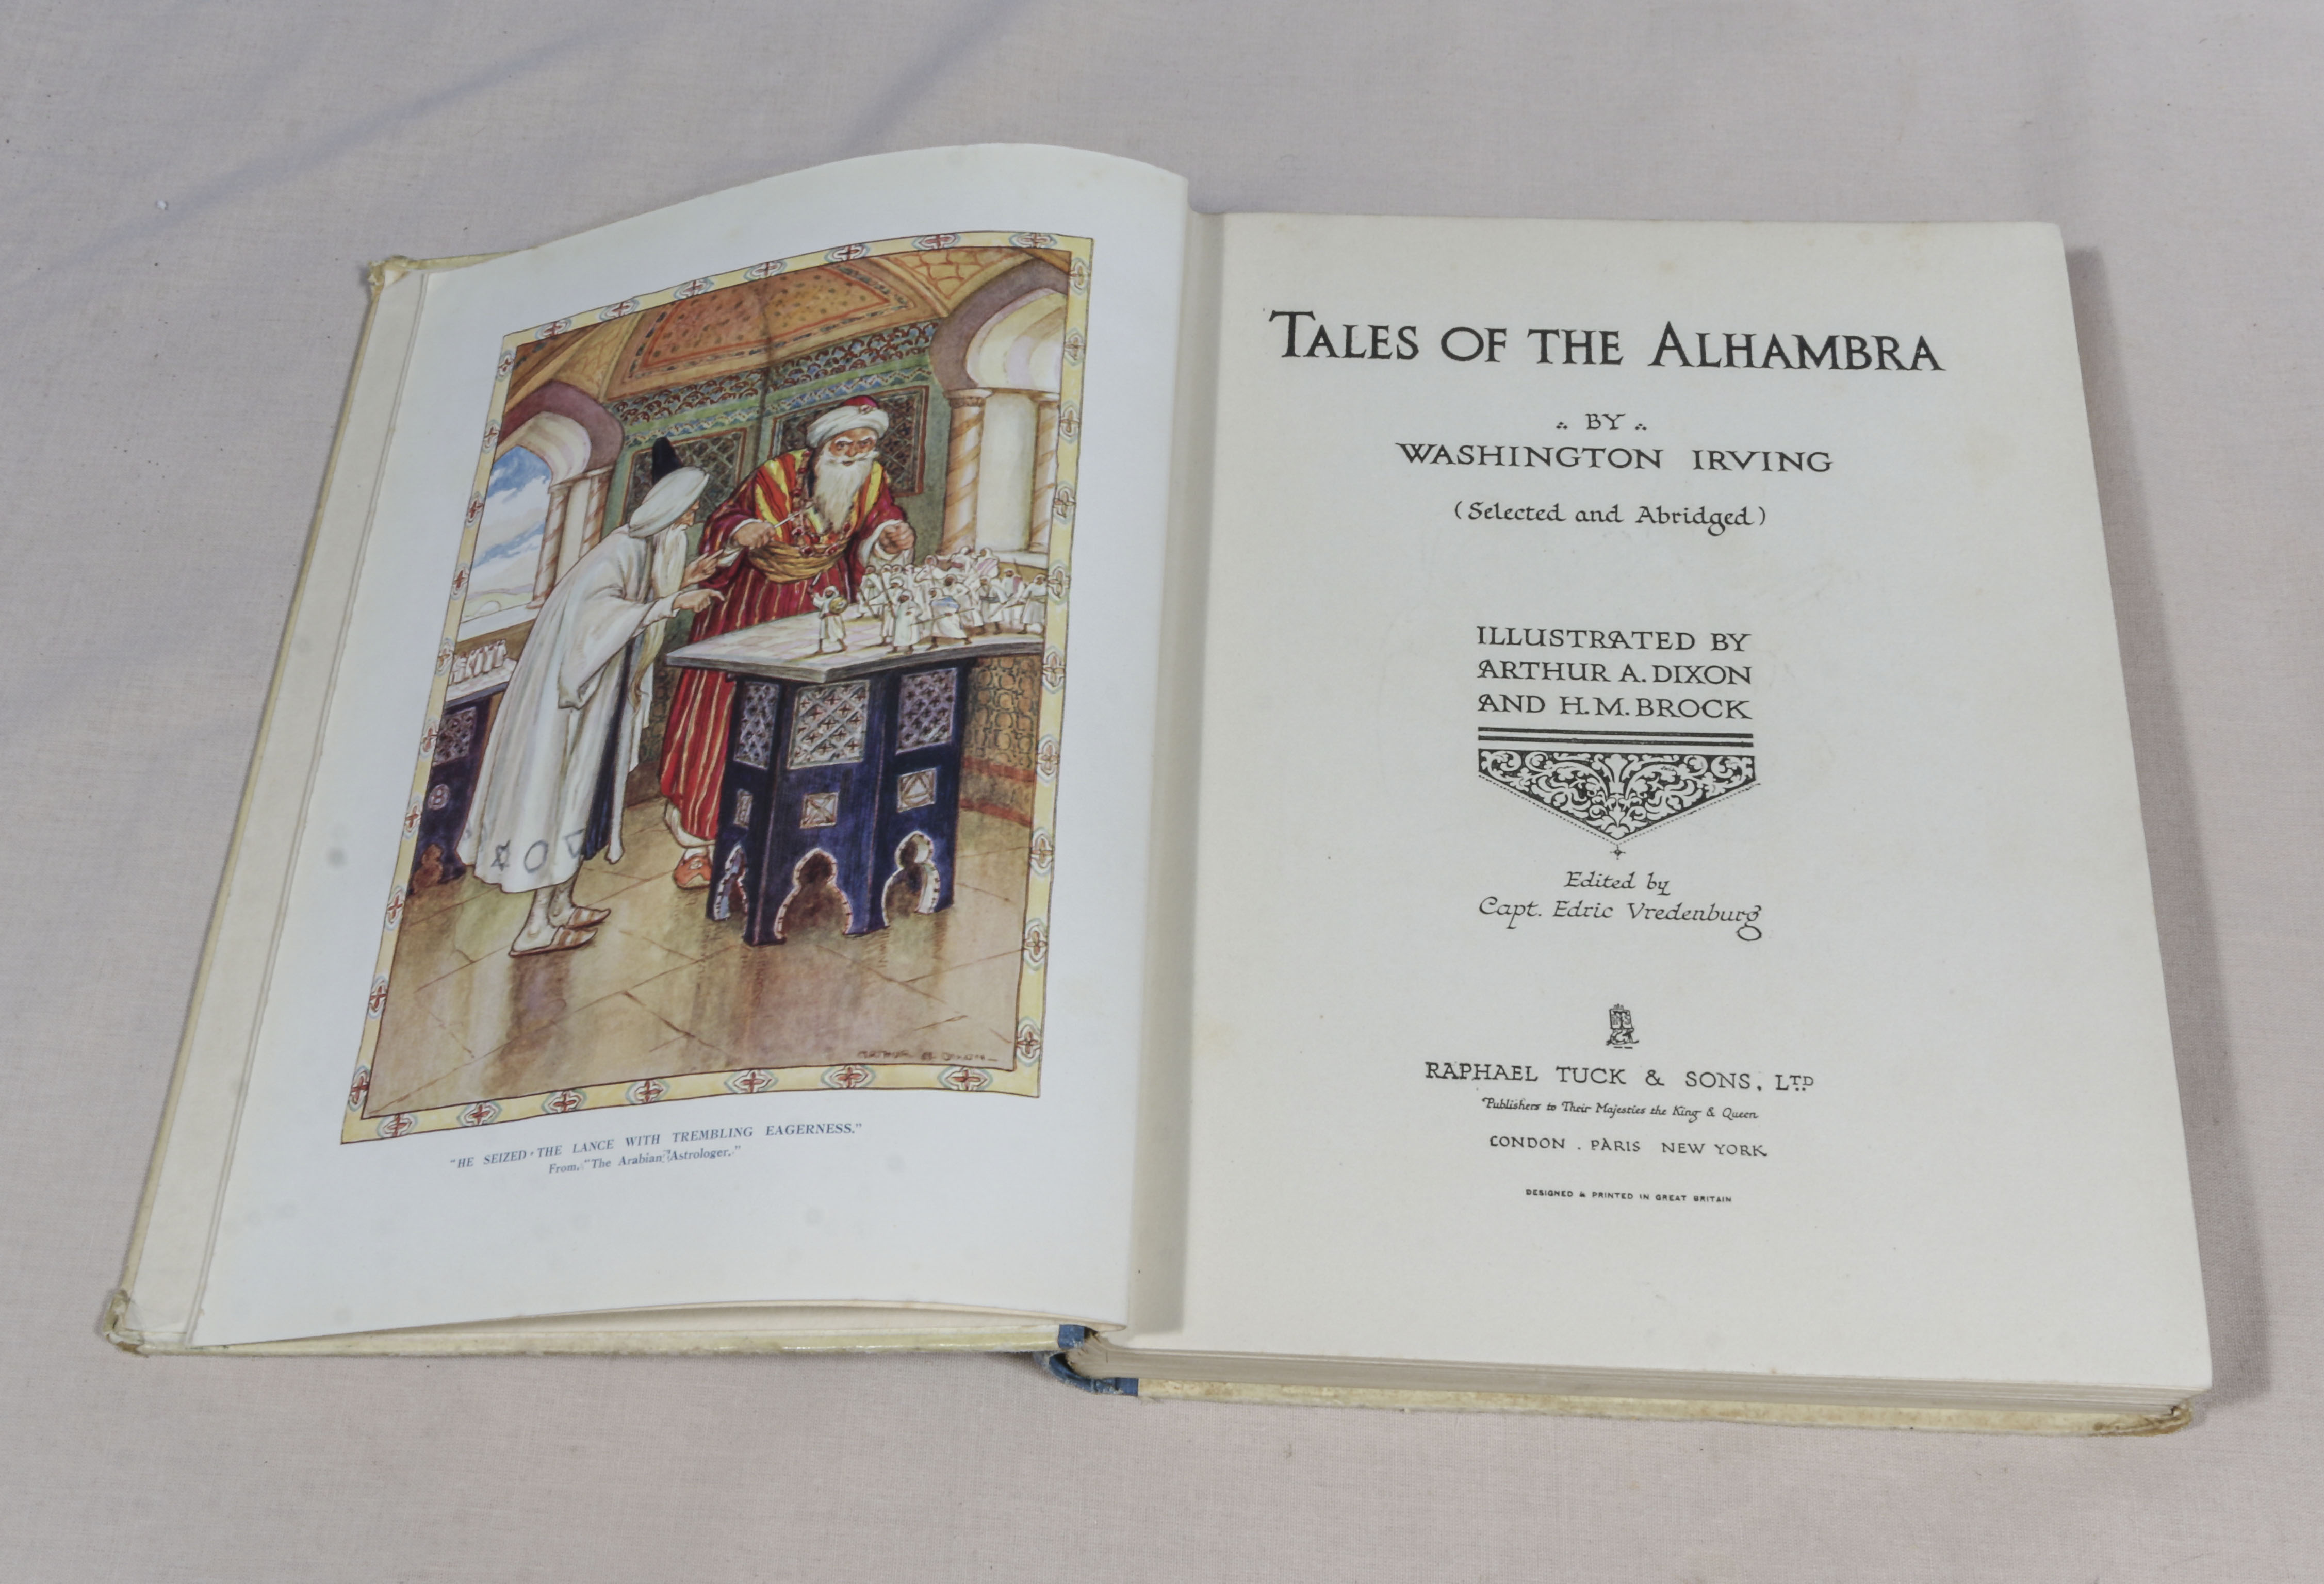 Washington Irving, tales of the Alhambra, selected and abridged, illustrated by Arthur A. Dixon - Image 5 of 10